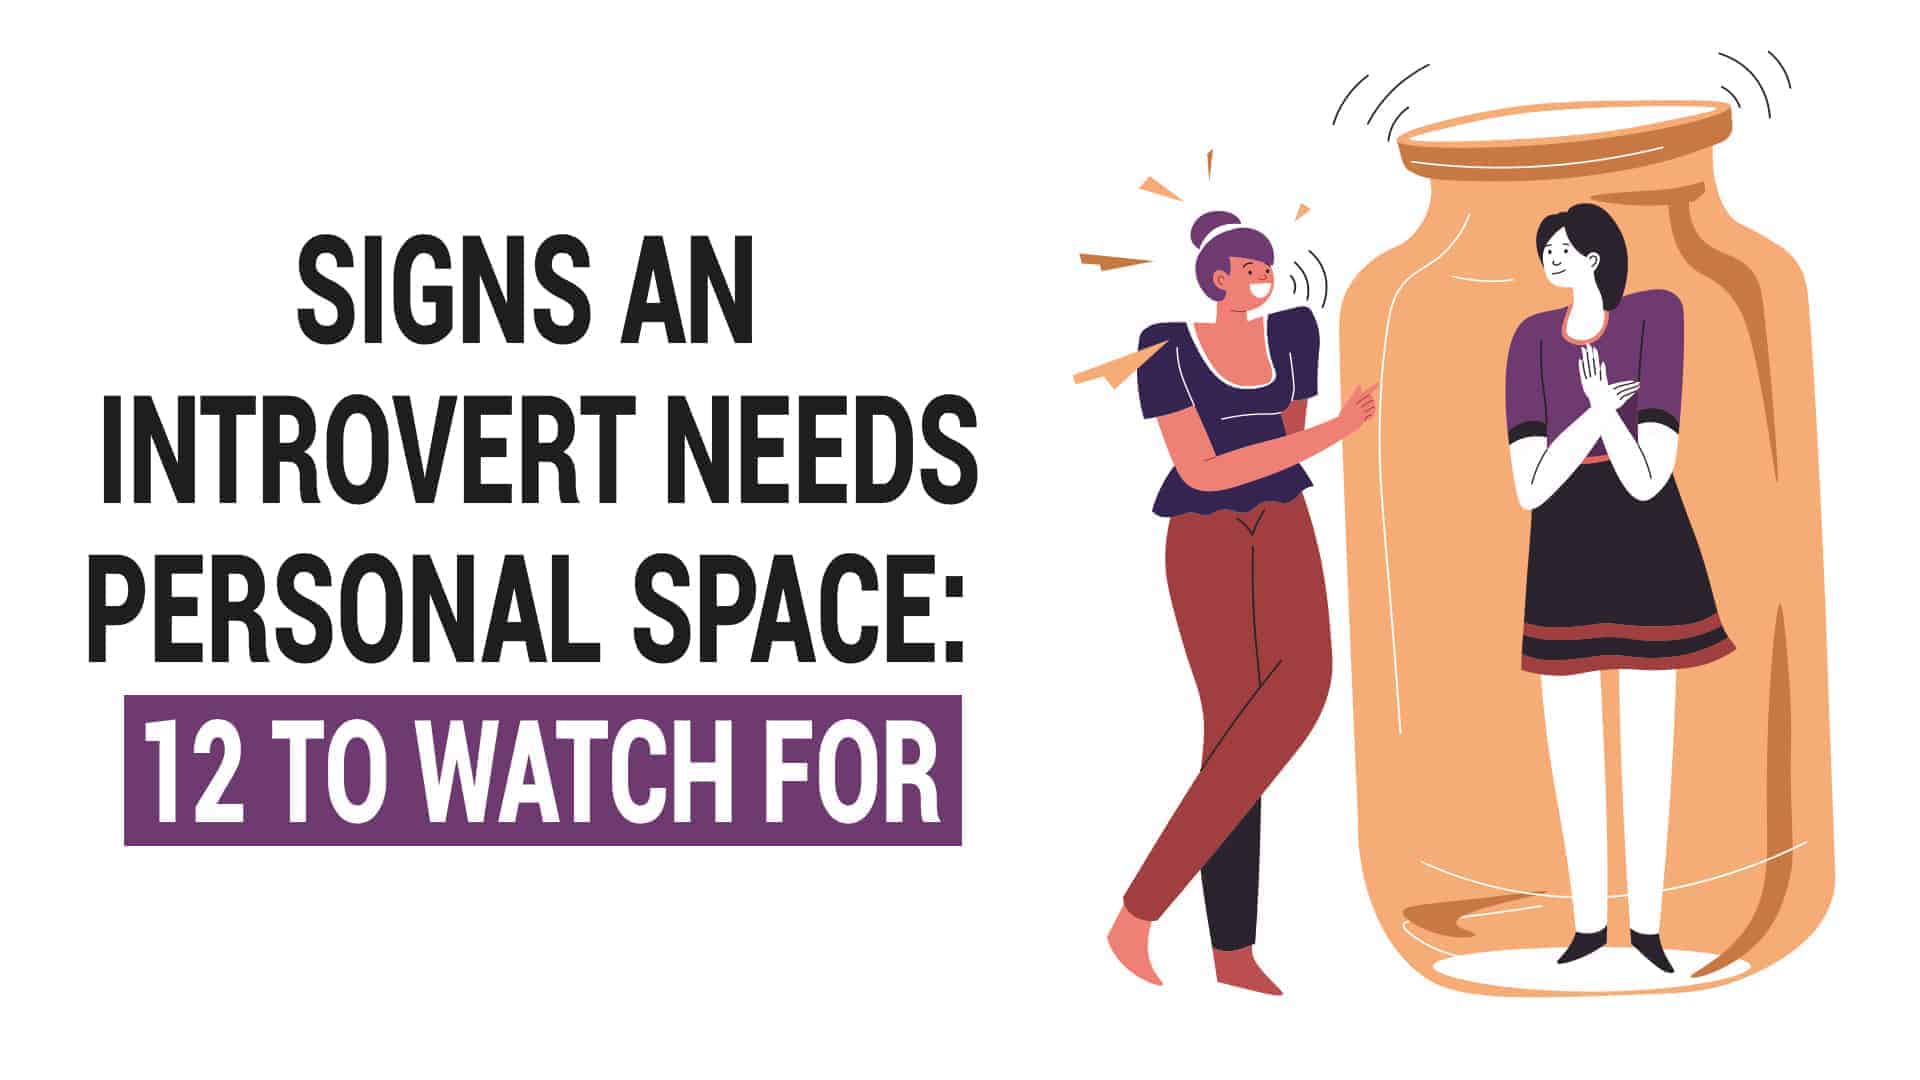 Signs An Introvert Needs Personal Space: 12 to Watch For